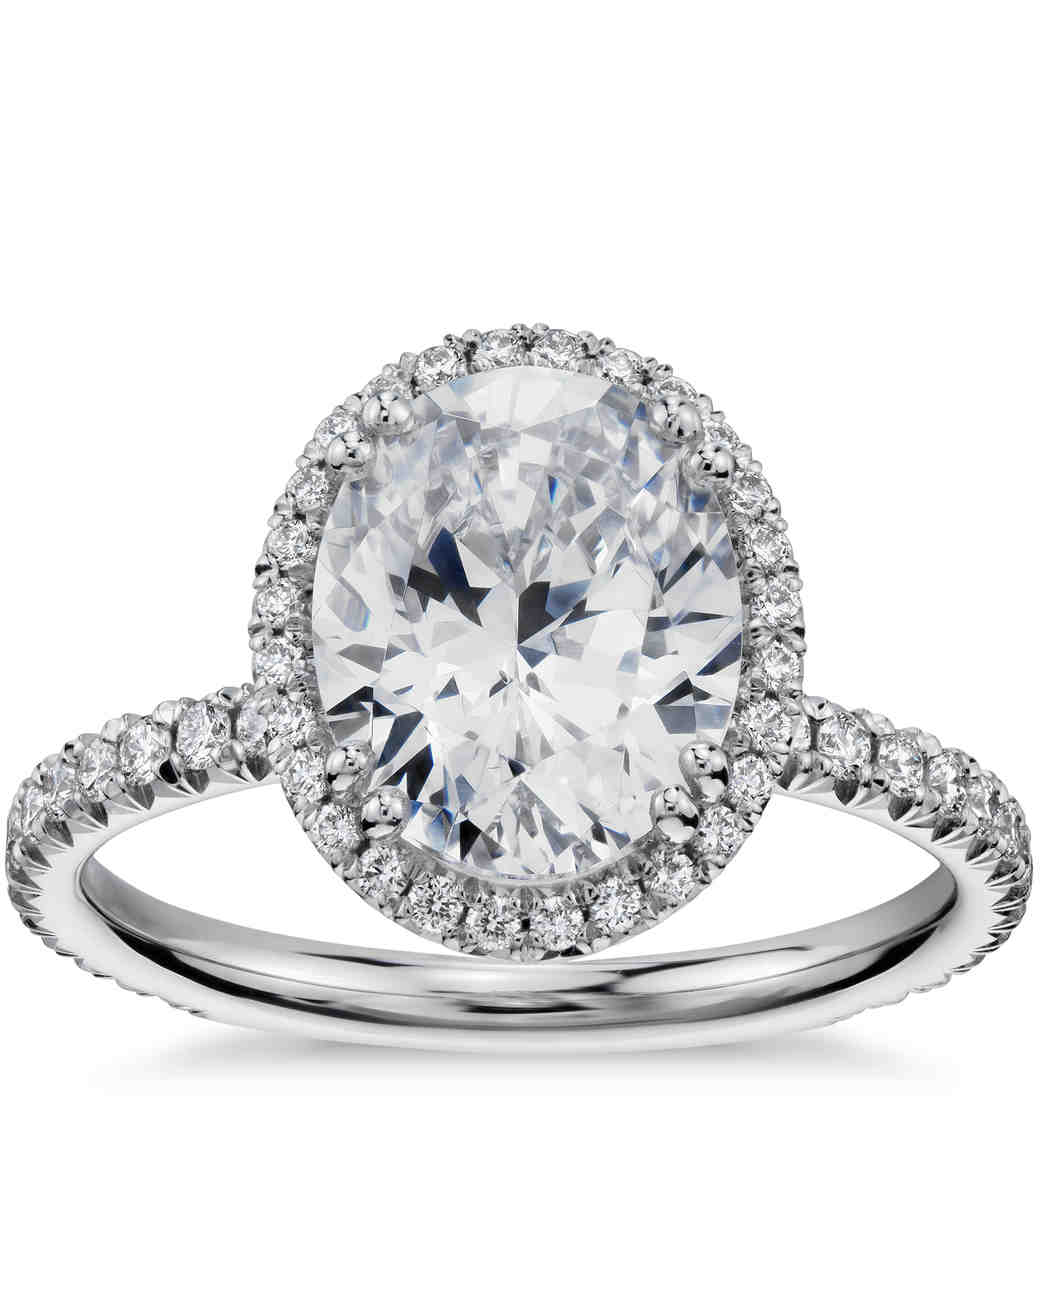  Oval  Engagement  Rings  for the Bride to Be Martha Stewart 